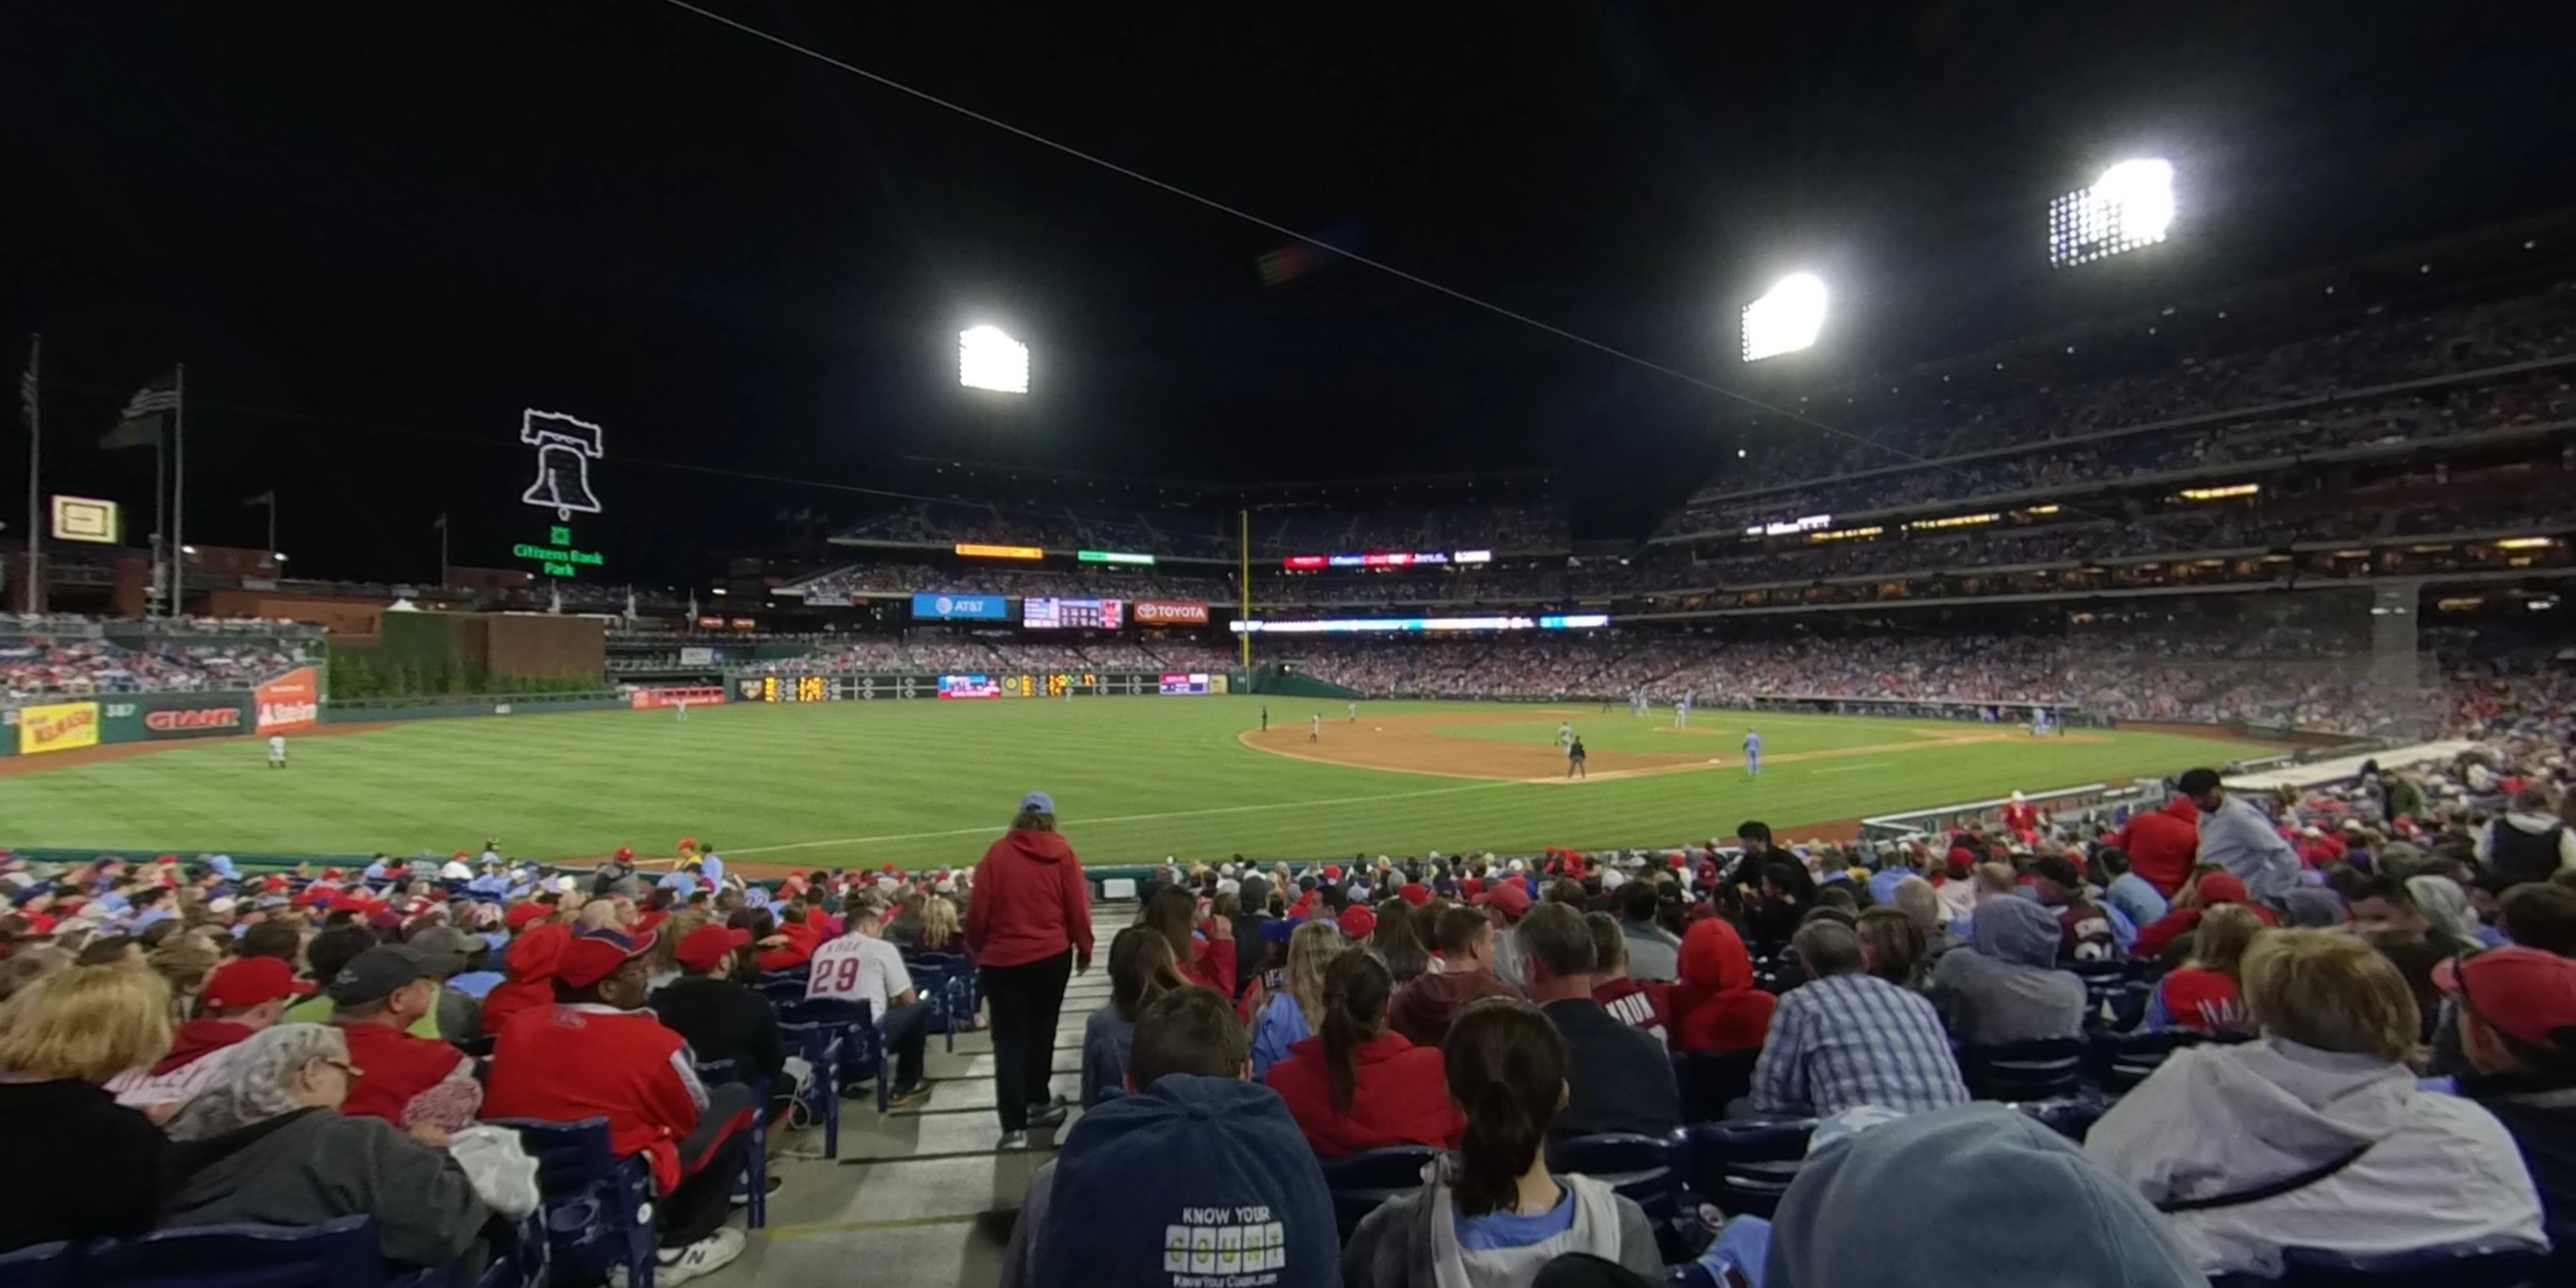 section 134 panoramic seat view  for baseball - citizens bank park